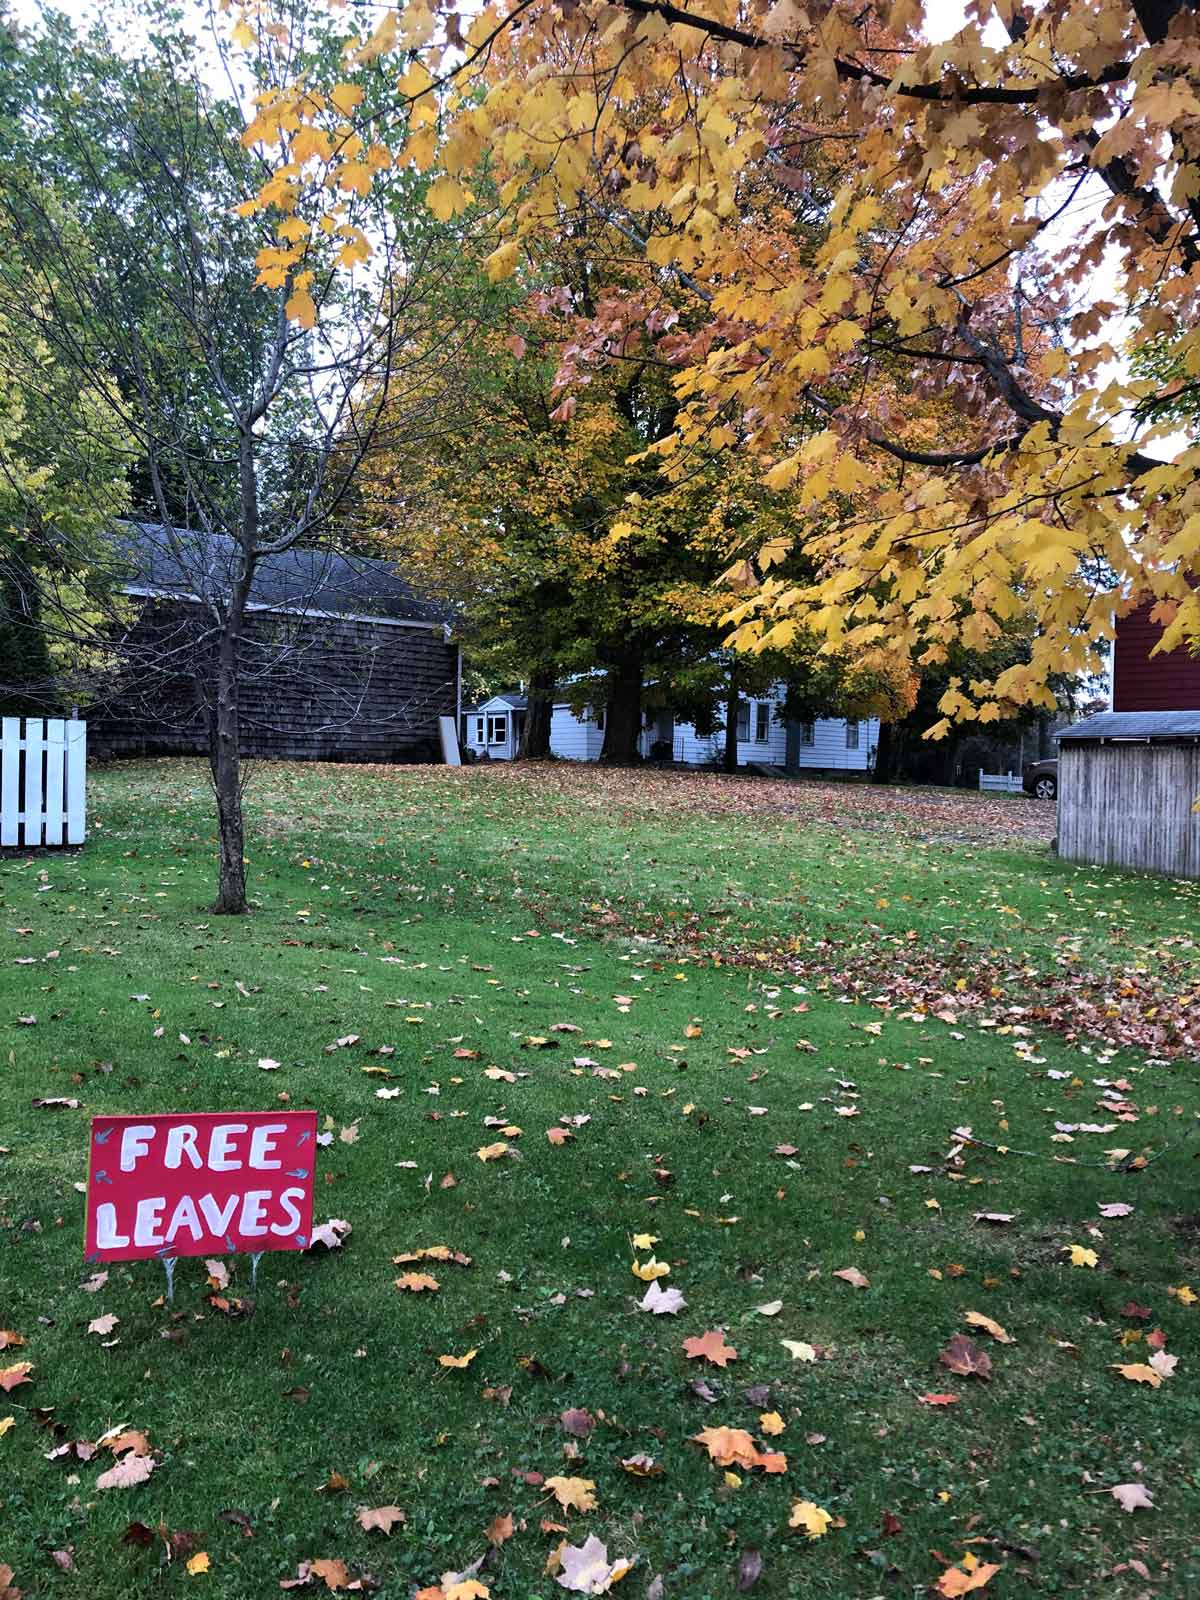 I’d rather not rake anymore. Come and get ‘em!